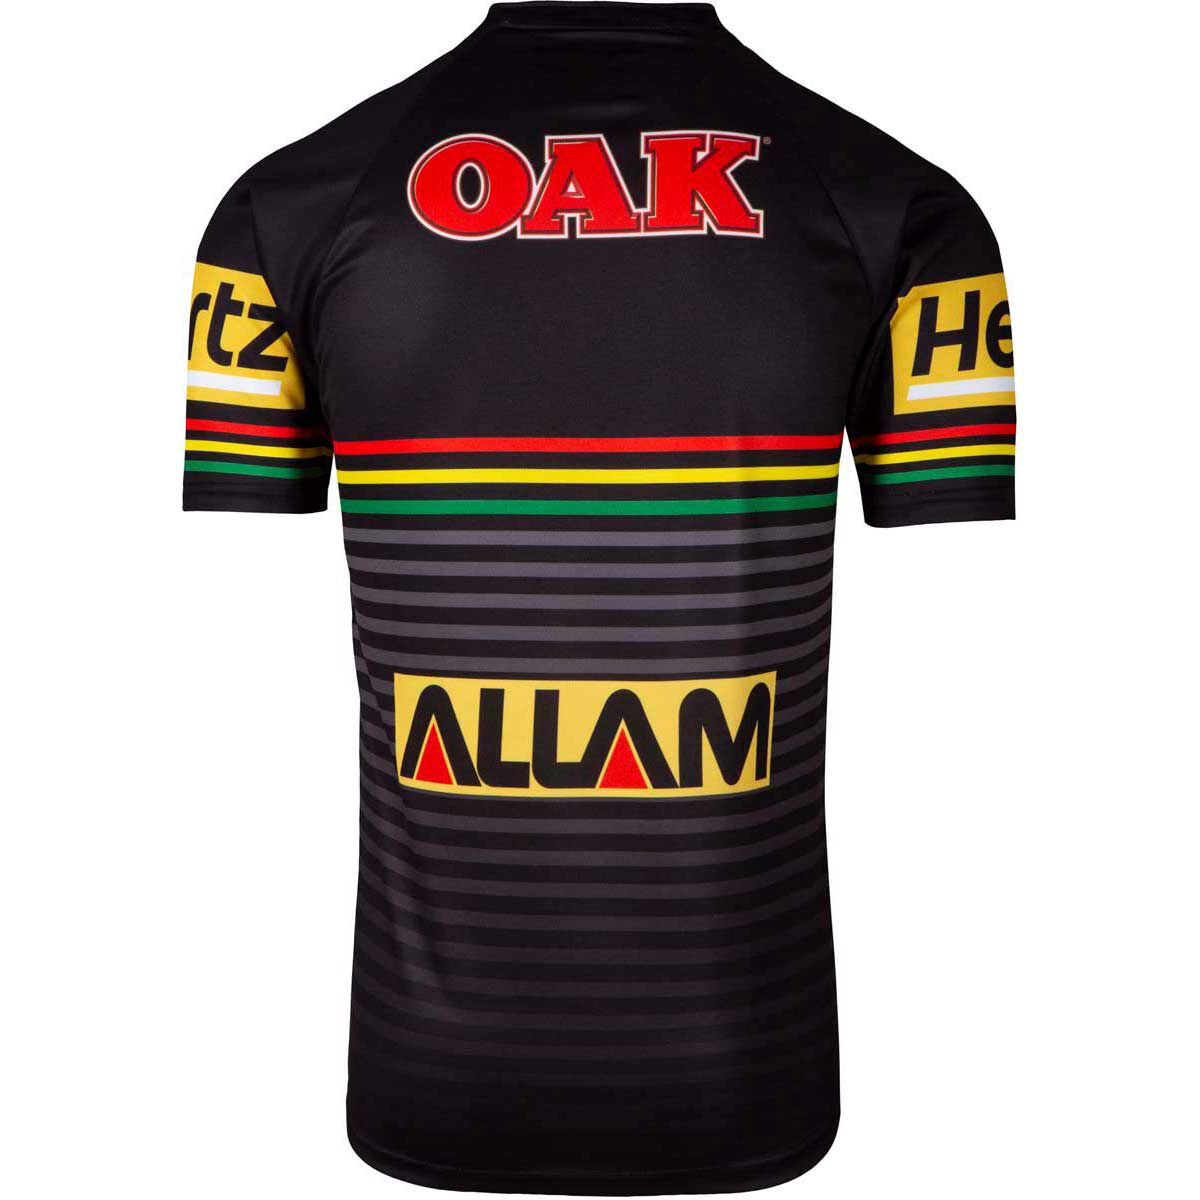 penrith panthers jersey